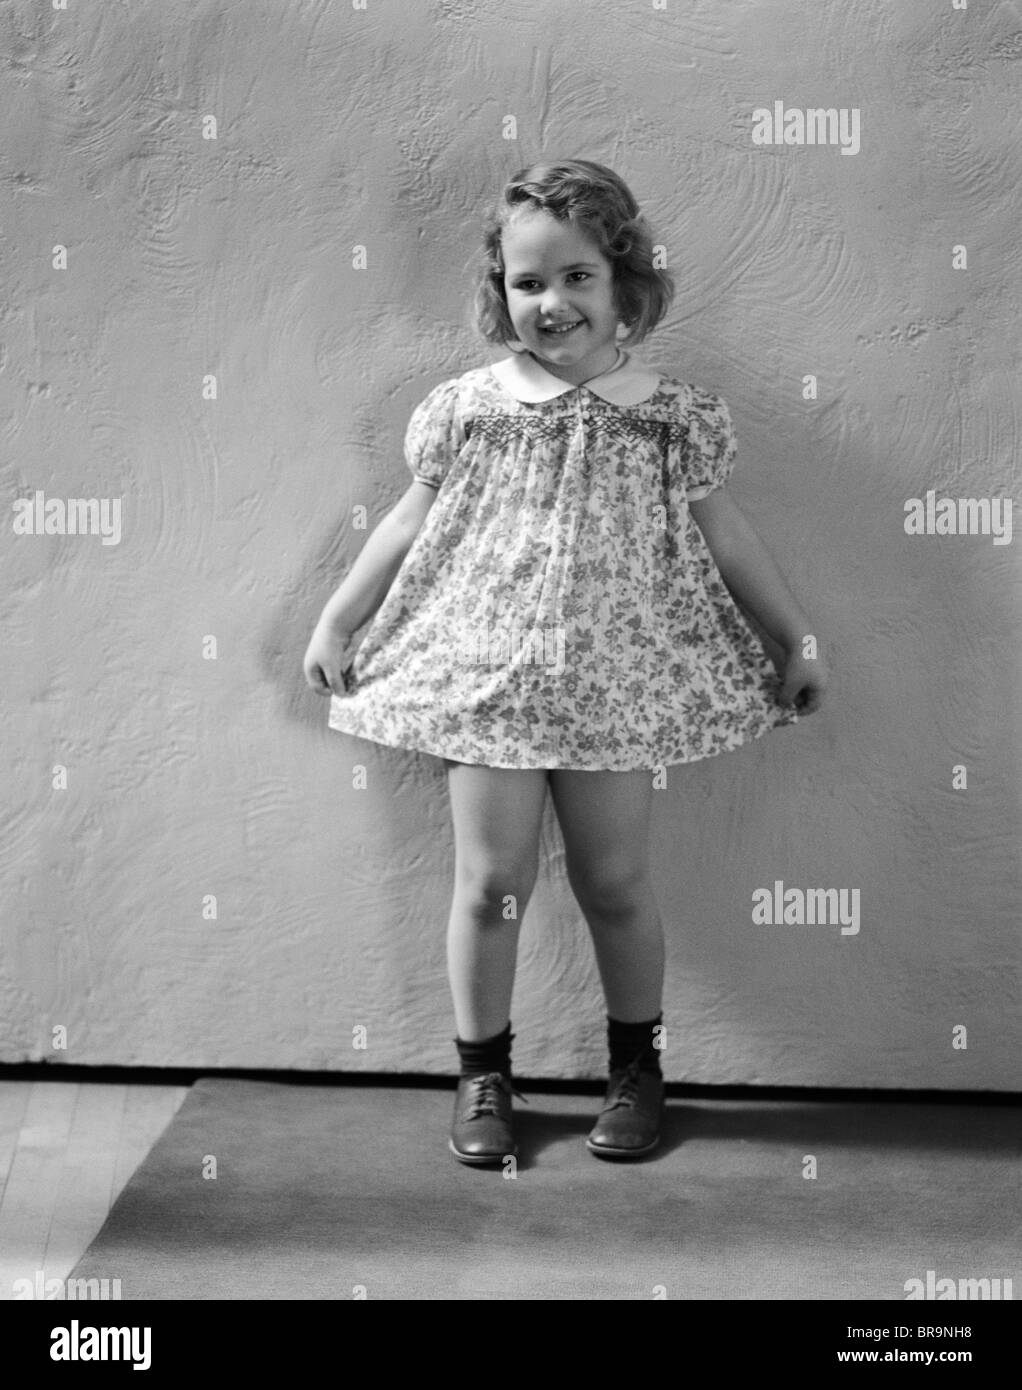 1940s LITTLE GIRL WEARING FLORAL PRINT DRESS READY TO TAKE A BOW Stock Photo